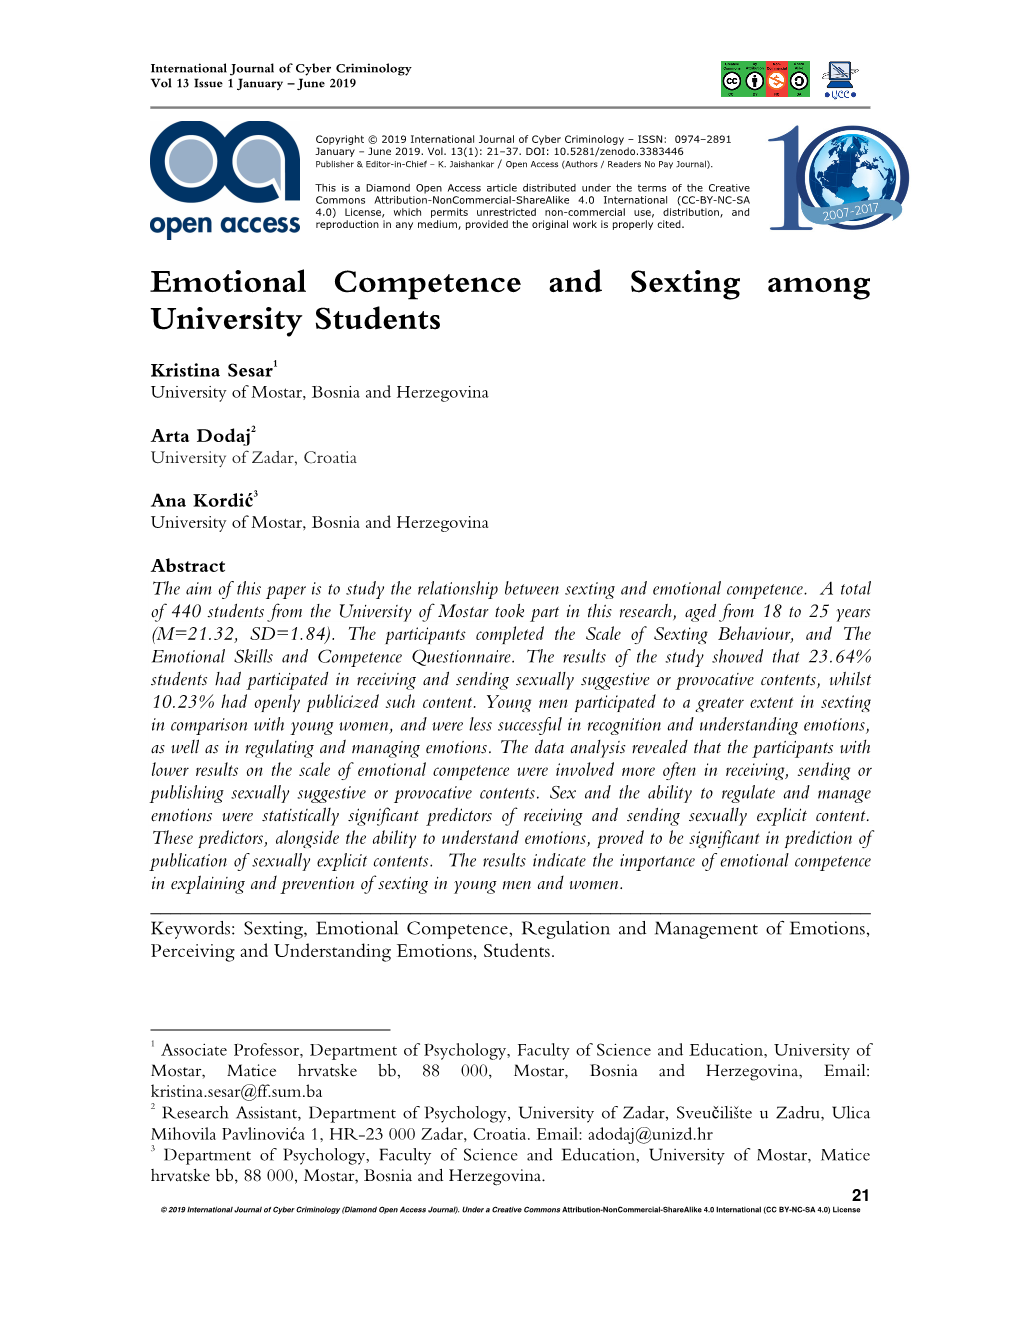 Emotional Competence and Sexting Among University Students